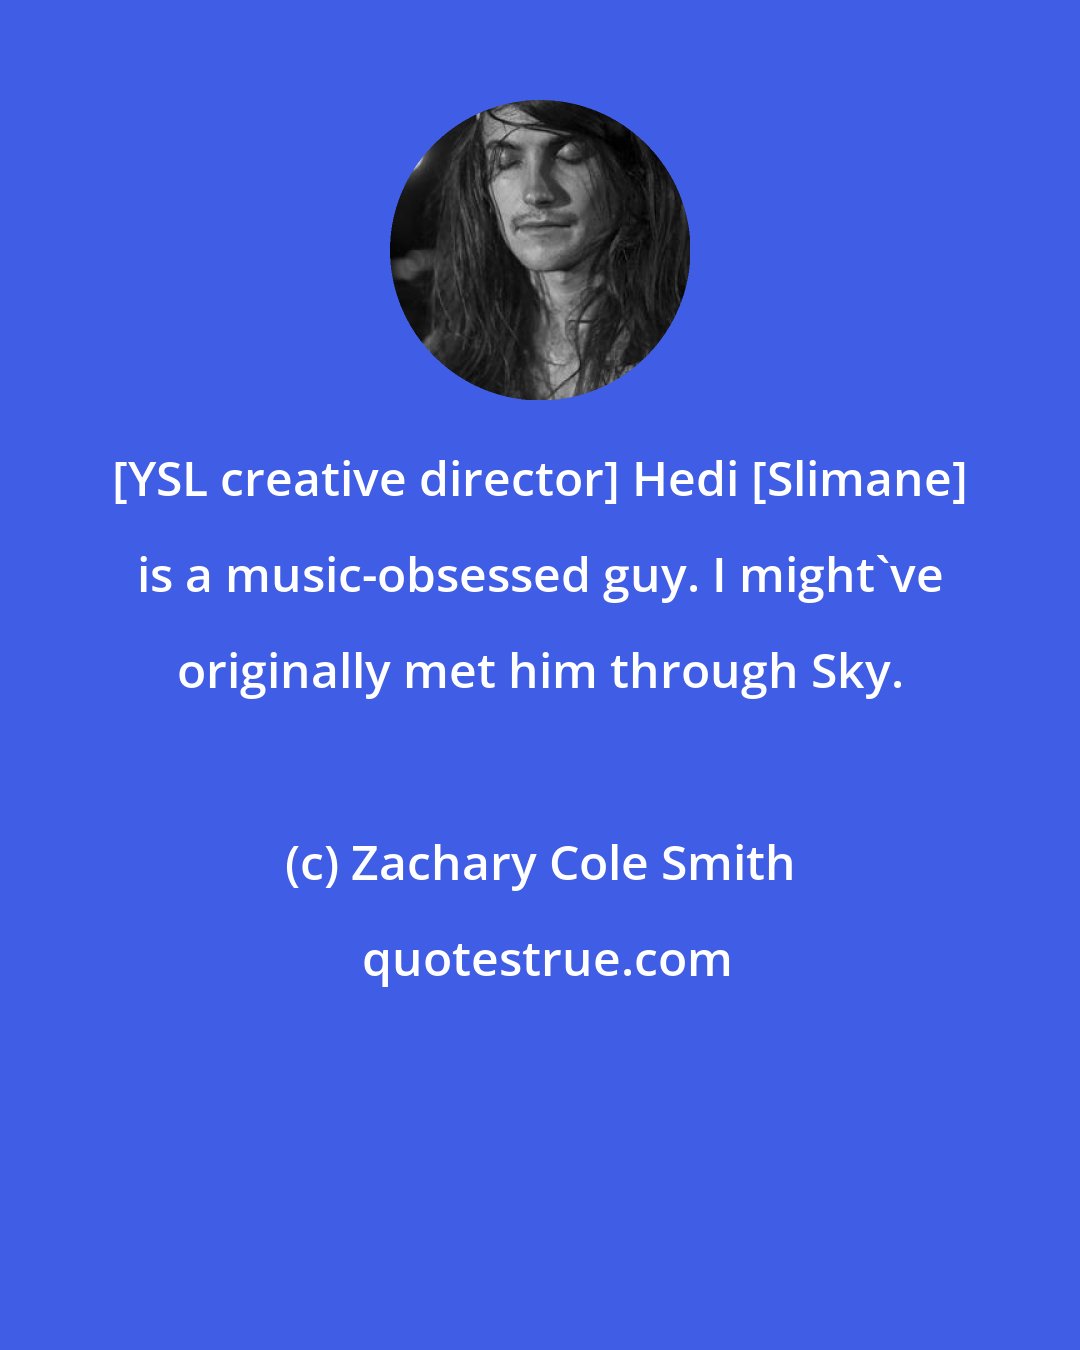 Zachary Cole Smith: [YSL creative director] Hedi [Slimane] is a music-obsessed guy. I might've originally met him through Sky.